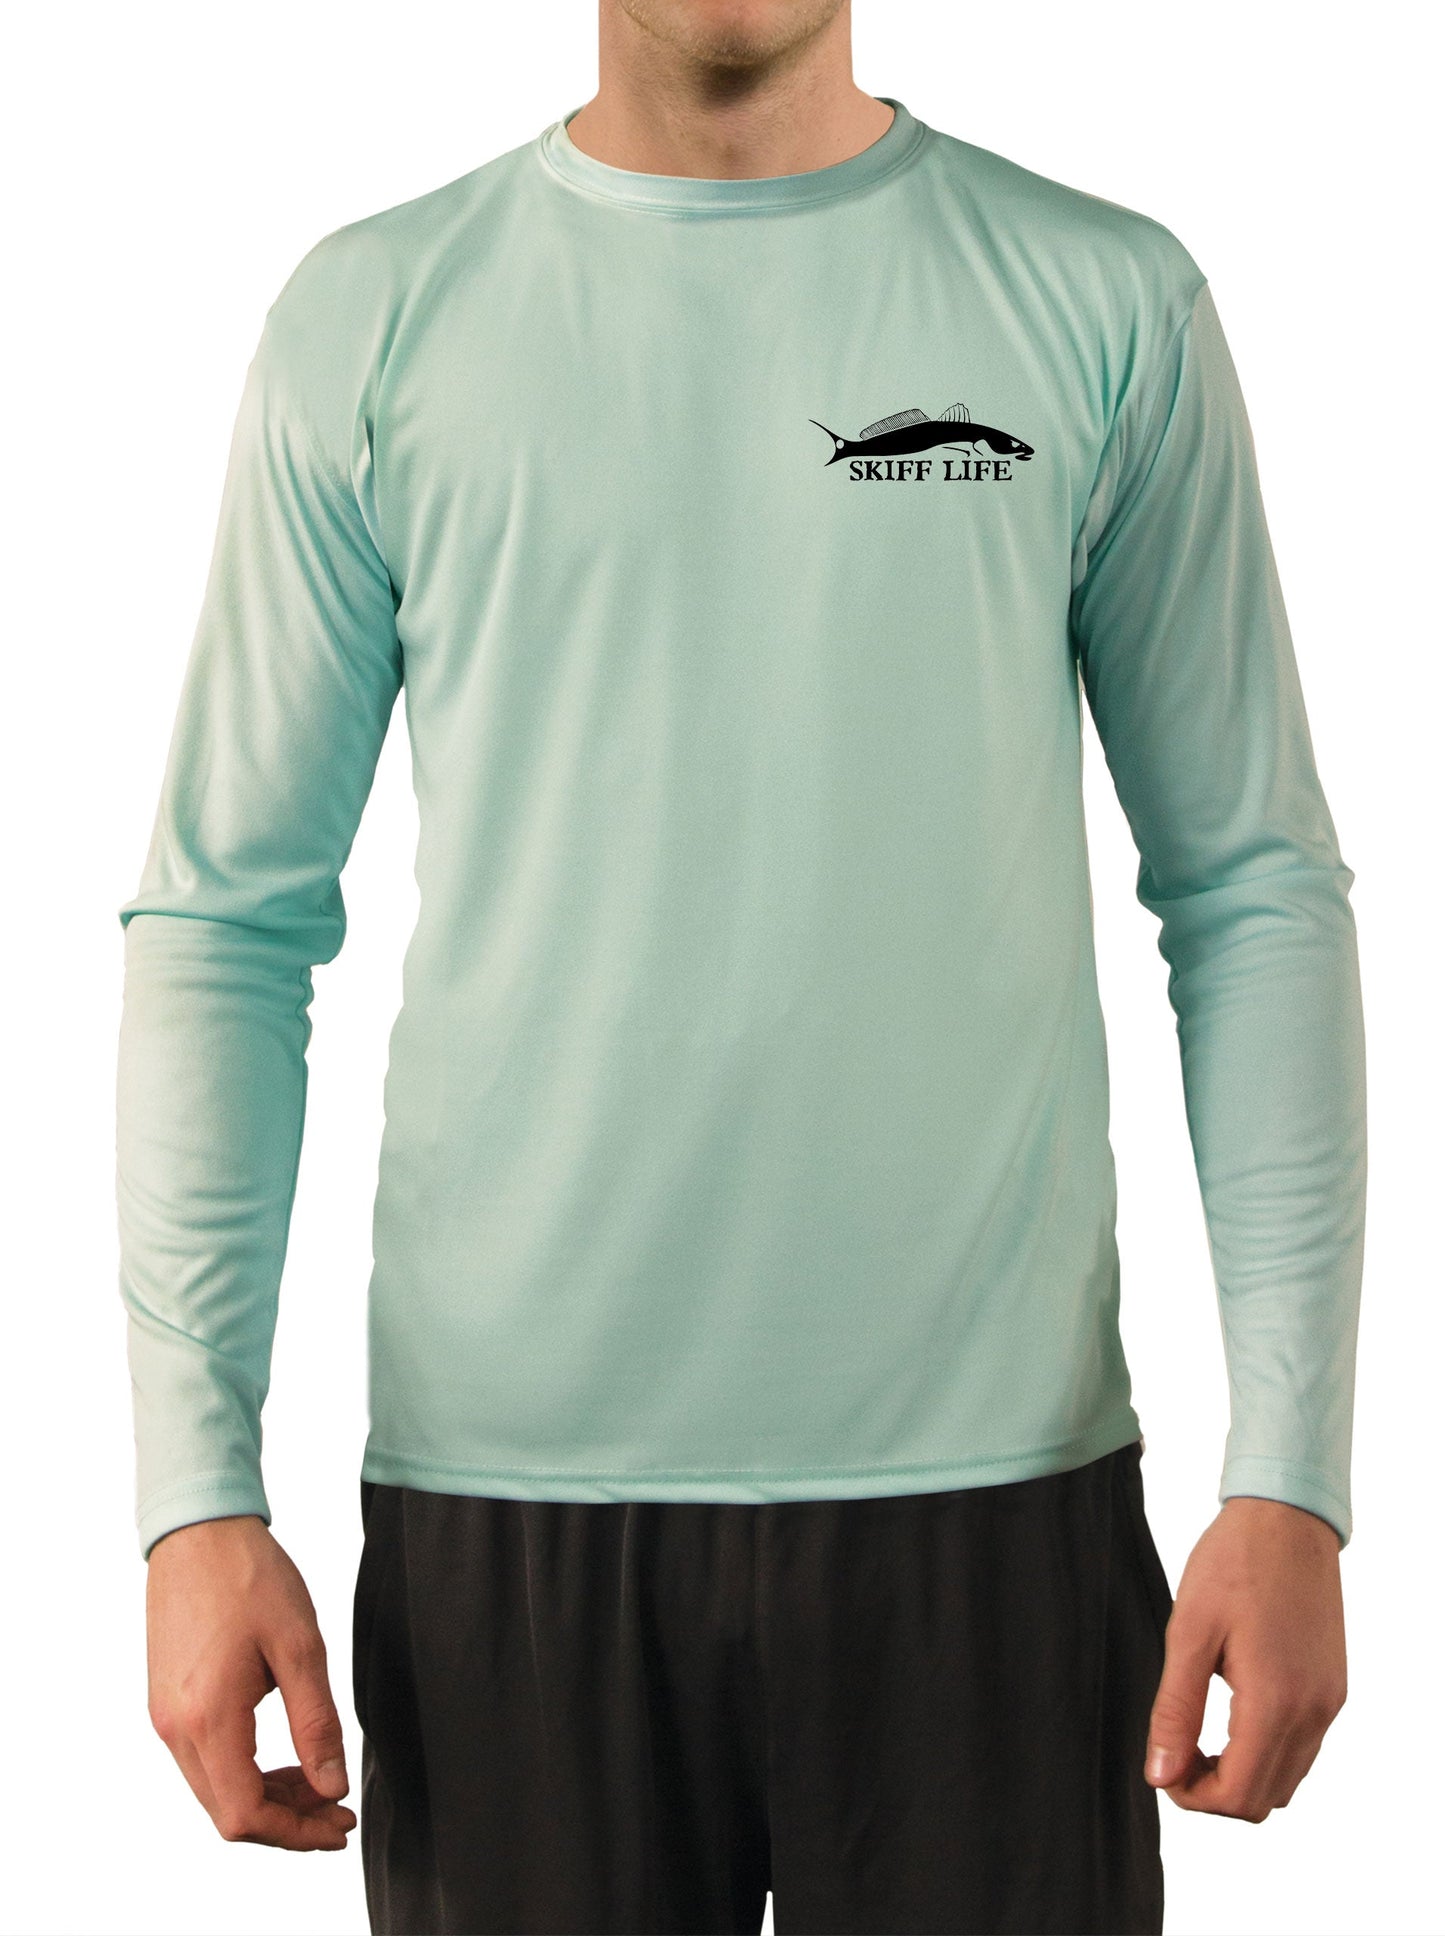 Big and Tall Mens Clothing - UV Protected Fishing T Shirt +50 Sun Protection with Moisture Wicking Technology - Up to 4XL X-Large / Pearl Gray